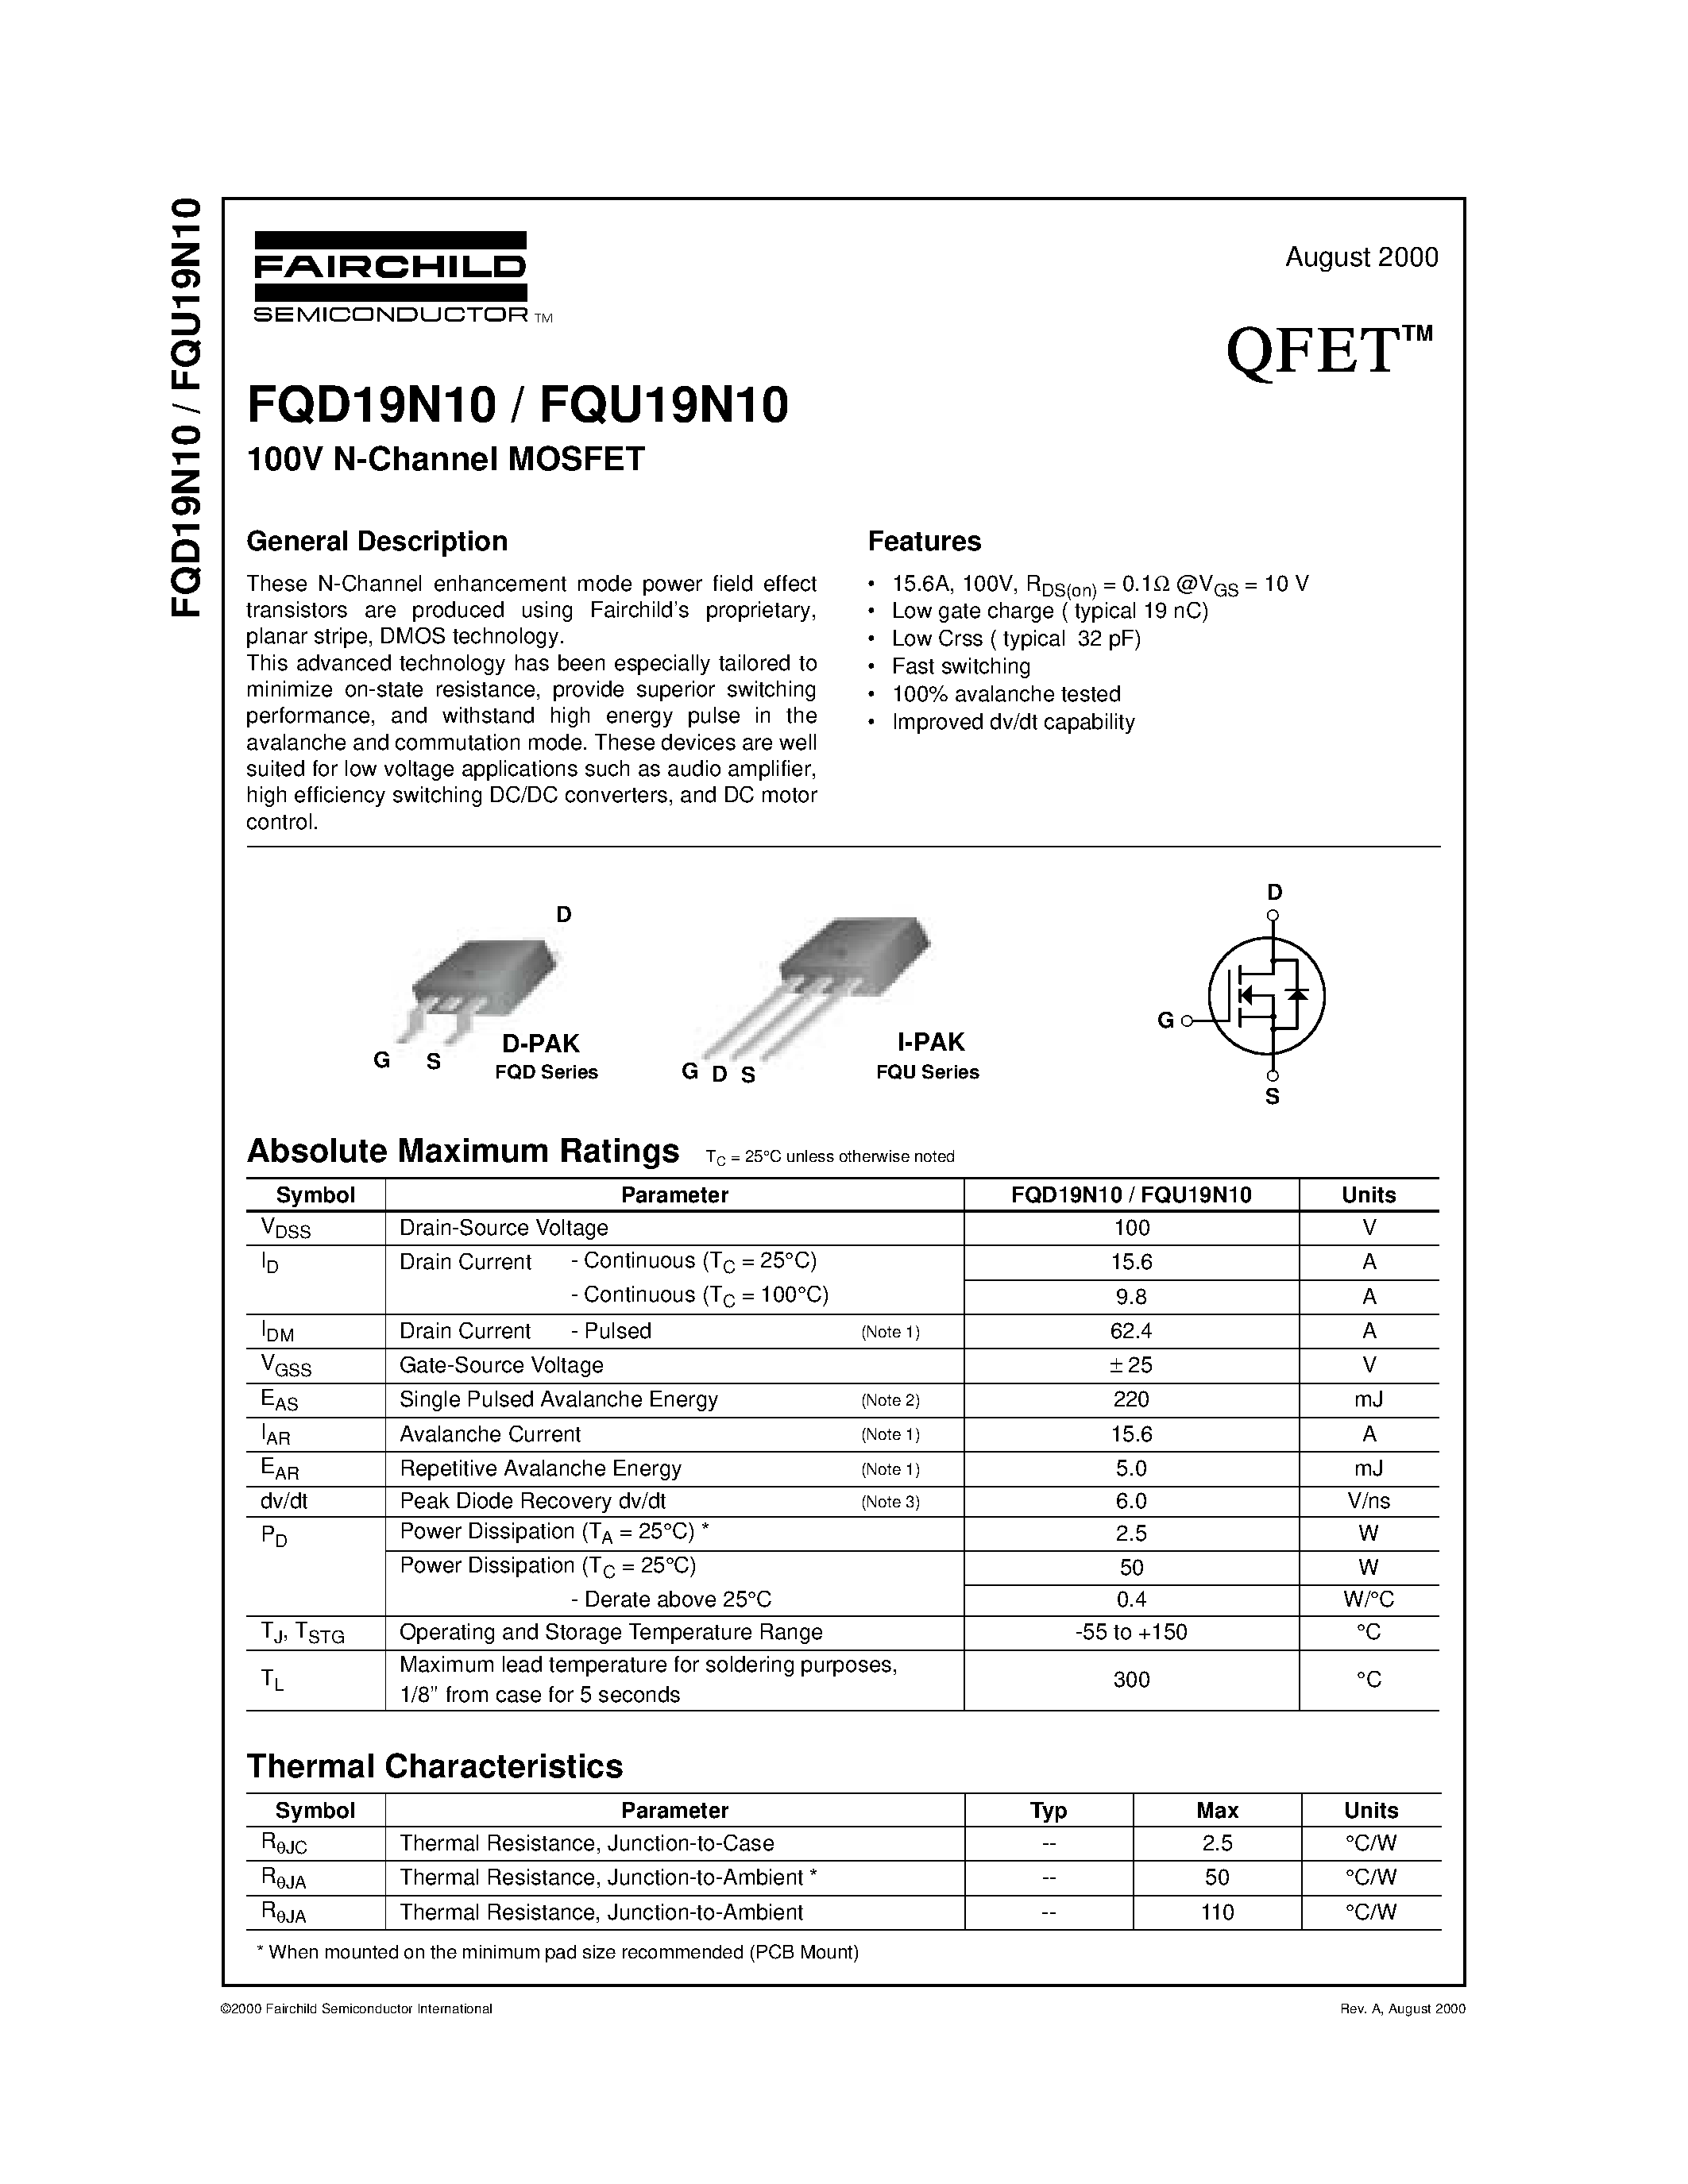 Datasheet FQD19N10 - 100V N-Channel MOSFET page 1